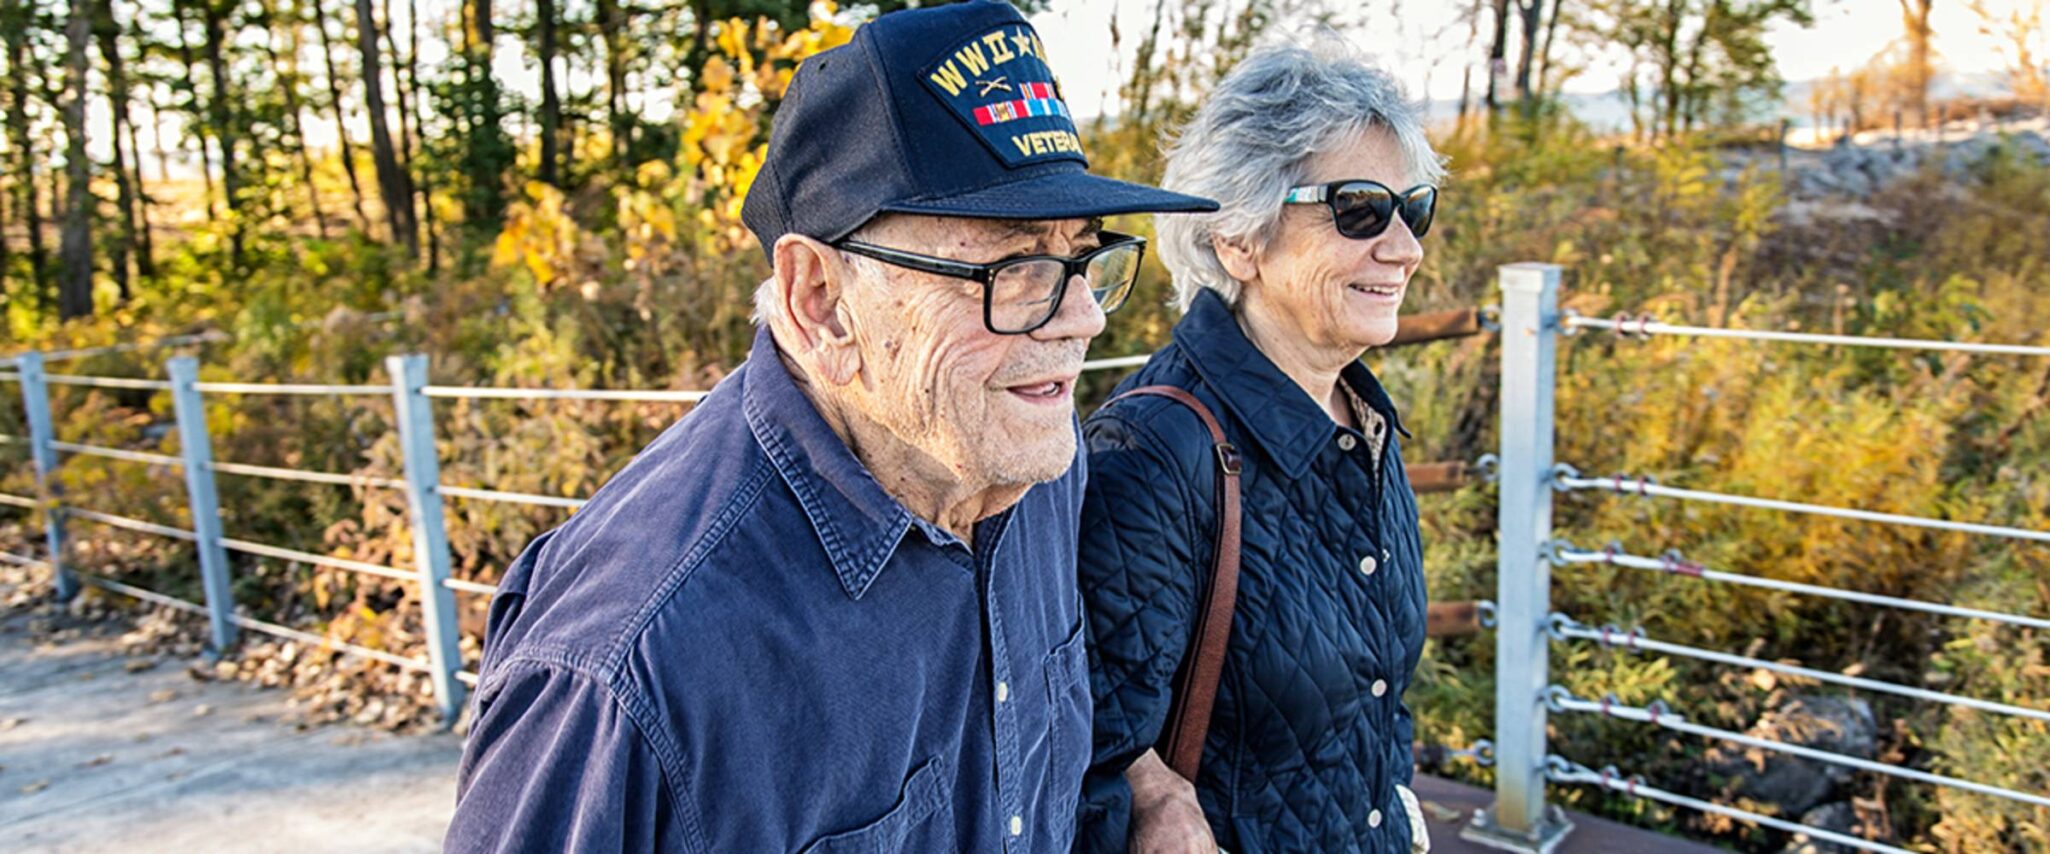 An elderly veteran walks in the forest with his spouse